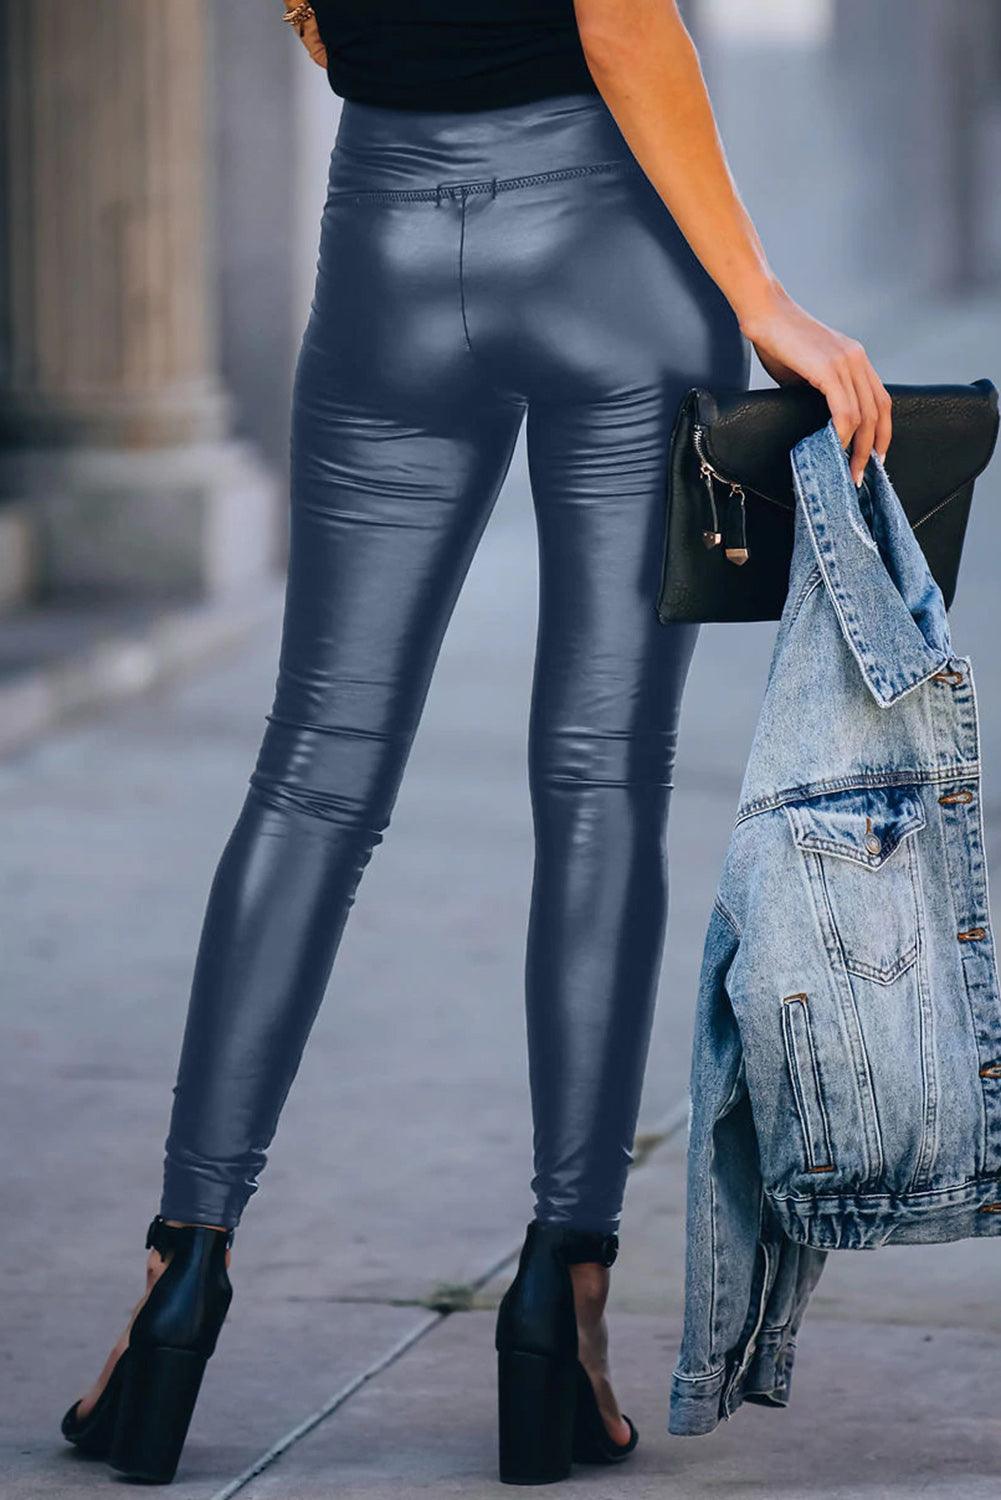 High Waisted Skinny Leggings Edgy Chic Style -Women’s matte finished tight high waist leggings#Firefly Lane Boutique1